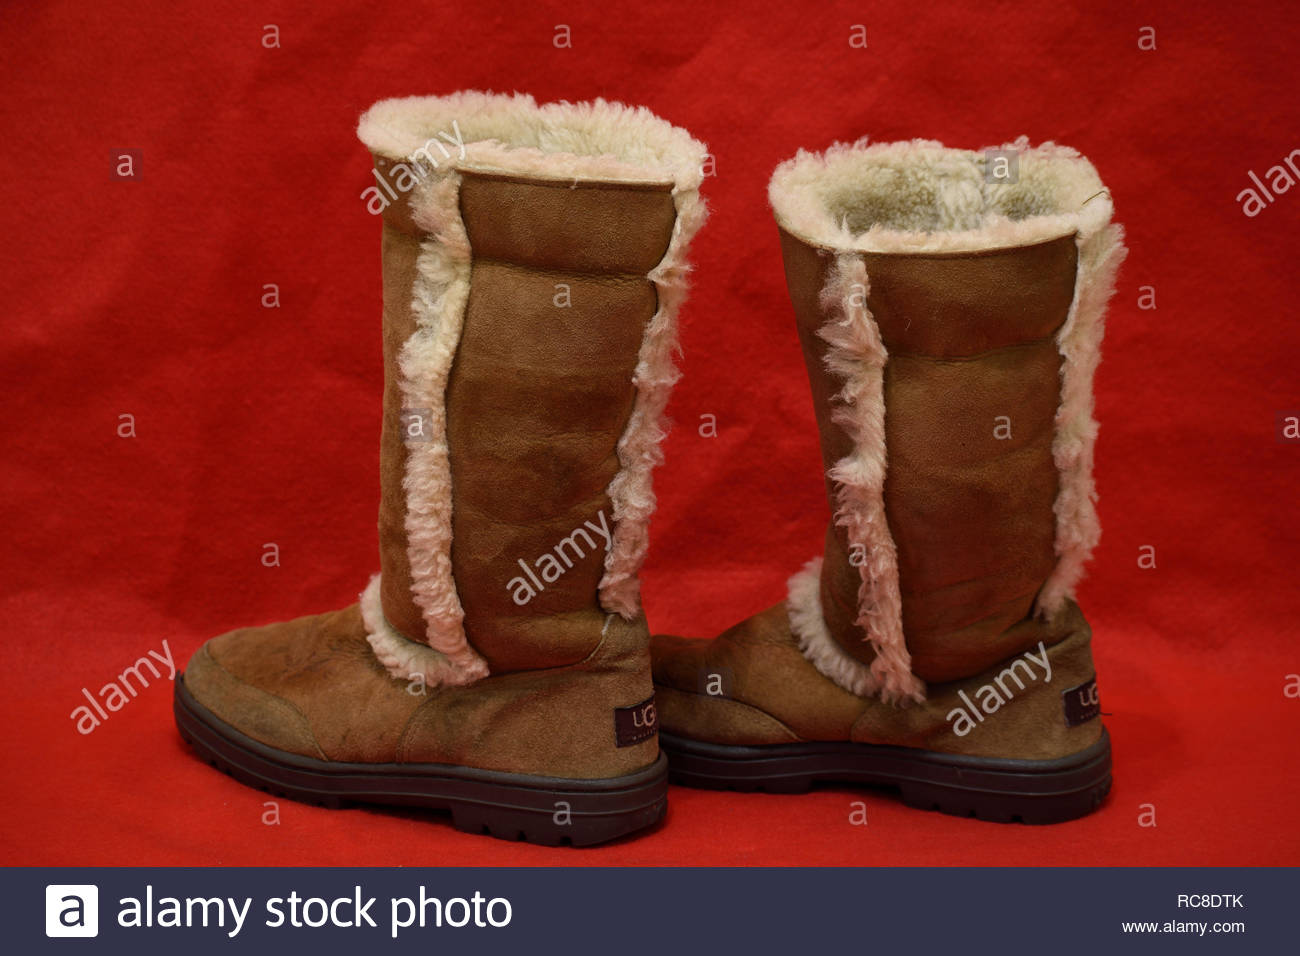 old style uggs